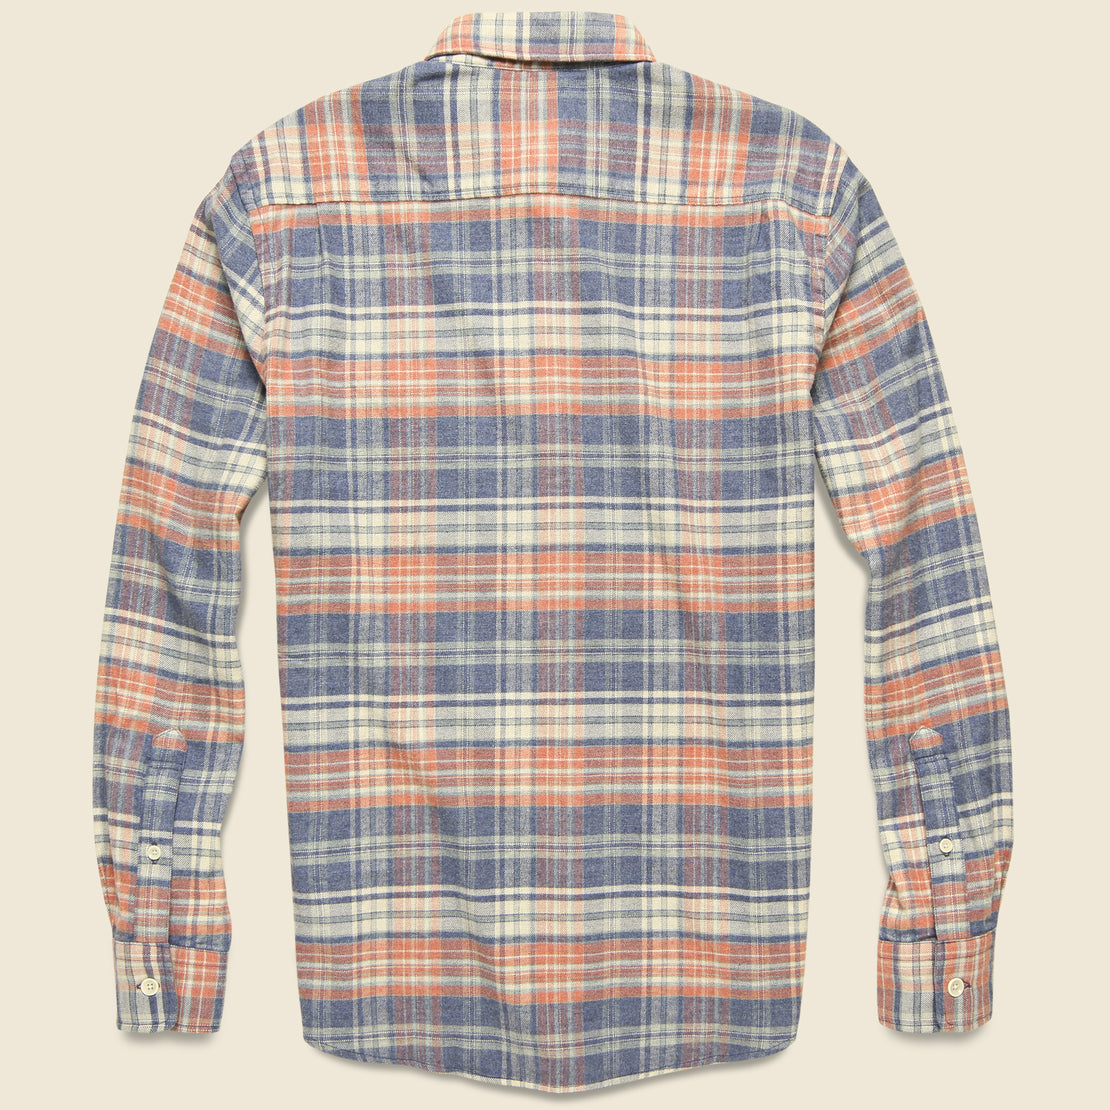 Stretch Seaview Flannel - Autumn Plaid - Faherty - STAG Provisions - Tops - L/S Woven - Plaid